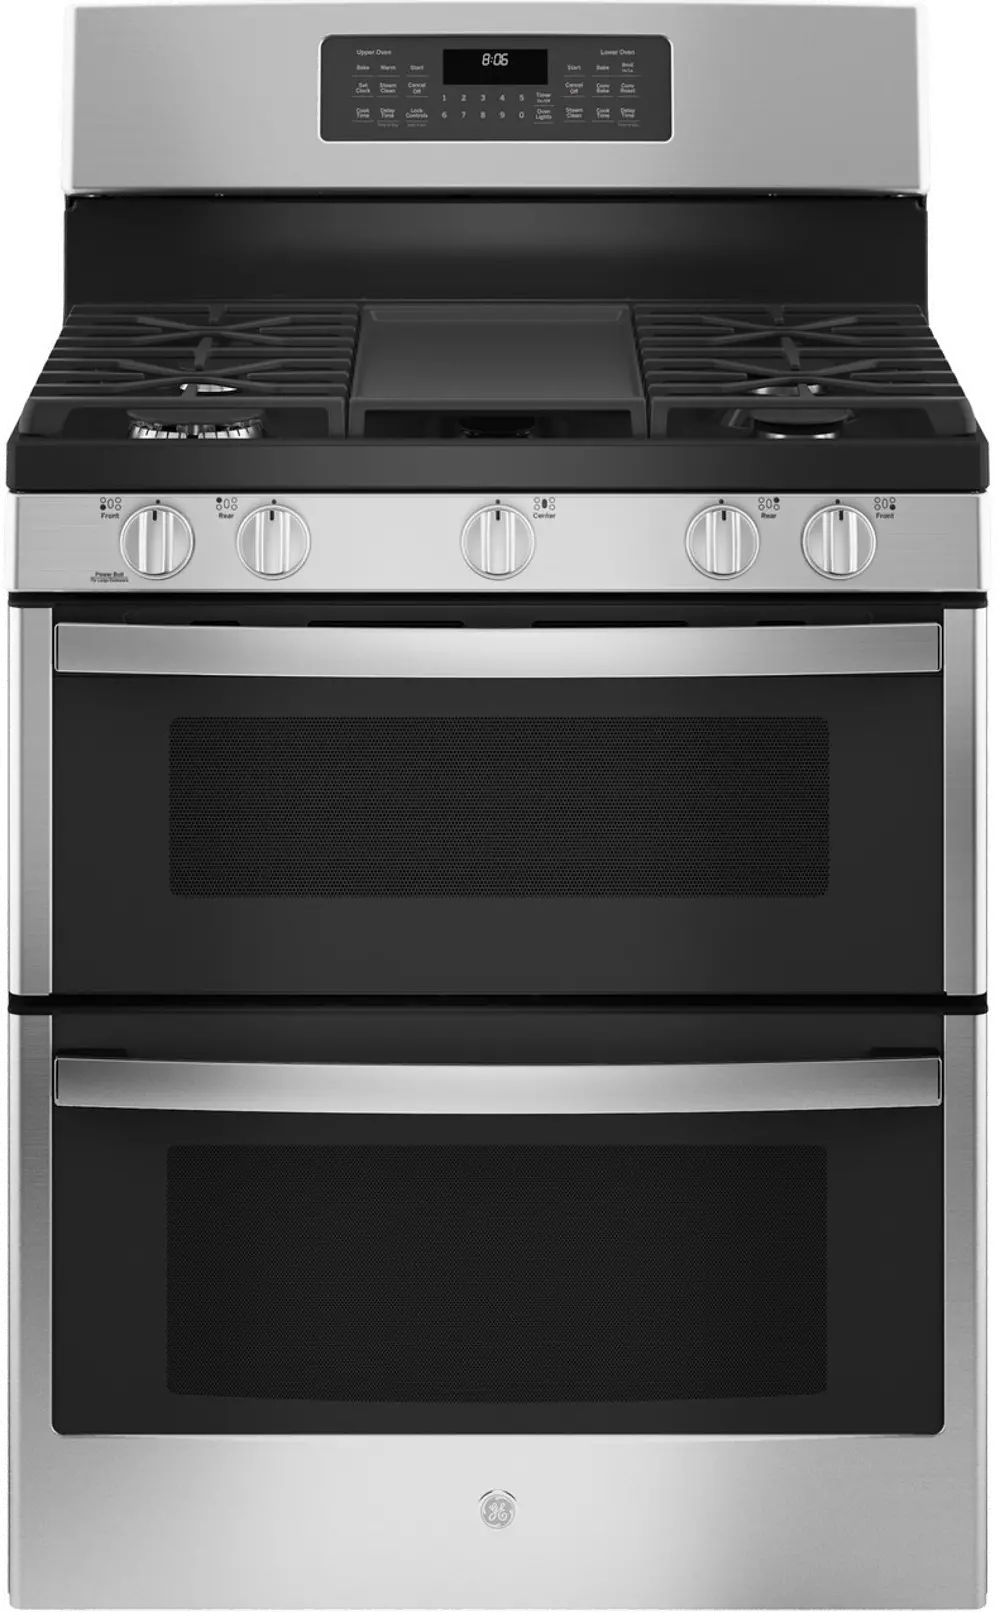 JGBS86SPSS-OLD GE Double Oven Gas Range with Convection - 6.8 cu. ft., Stainless Steel-1